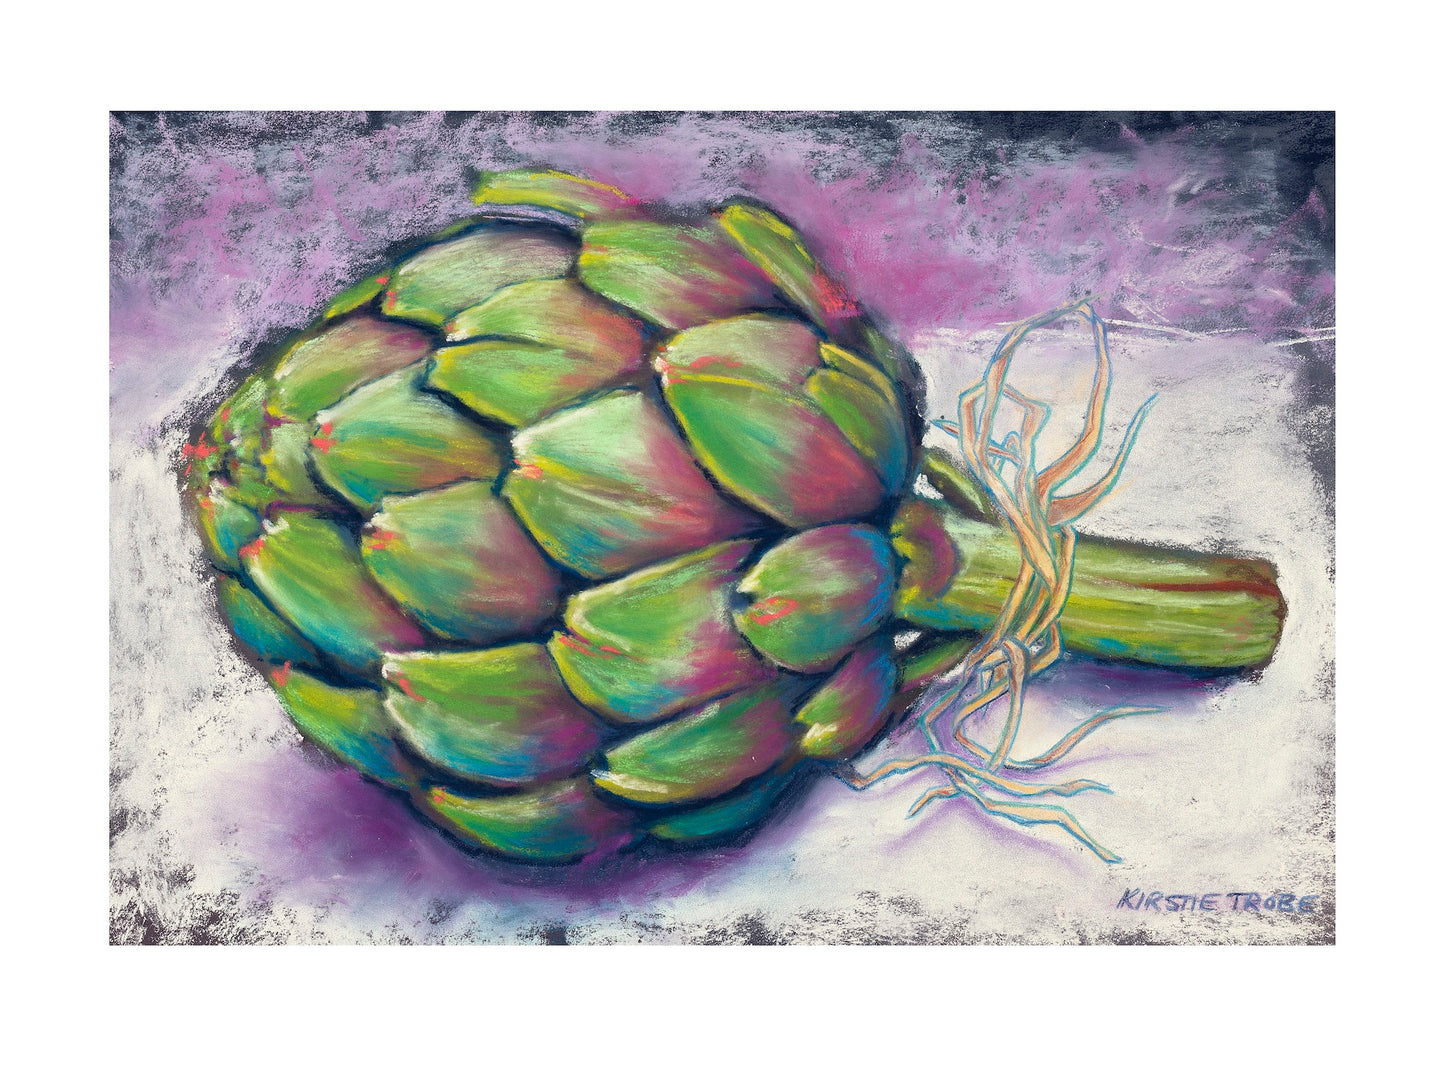 Single artichoke depicted with a straw tag on a white and purple background